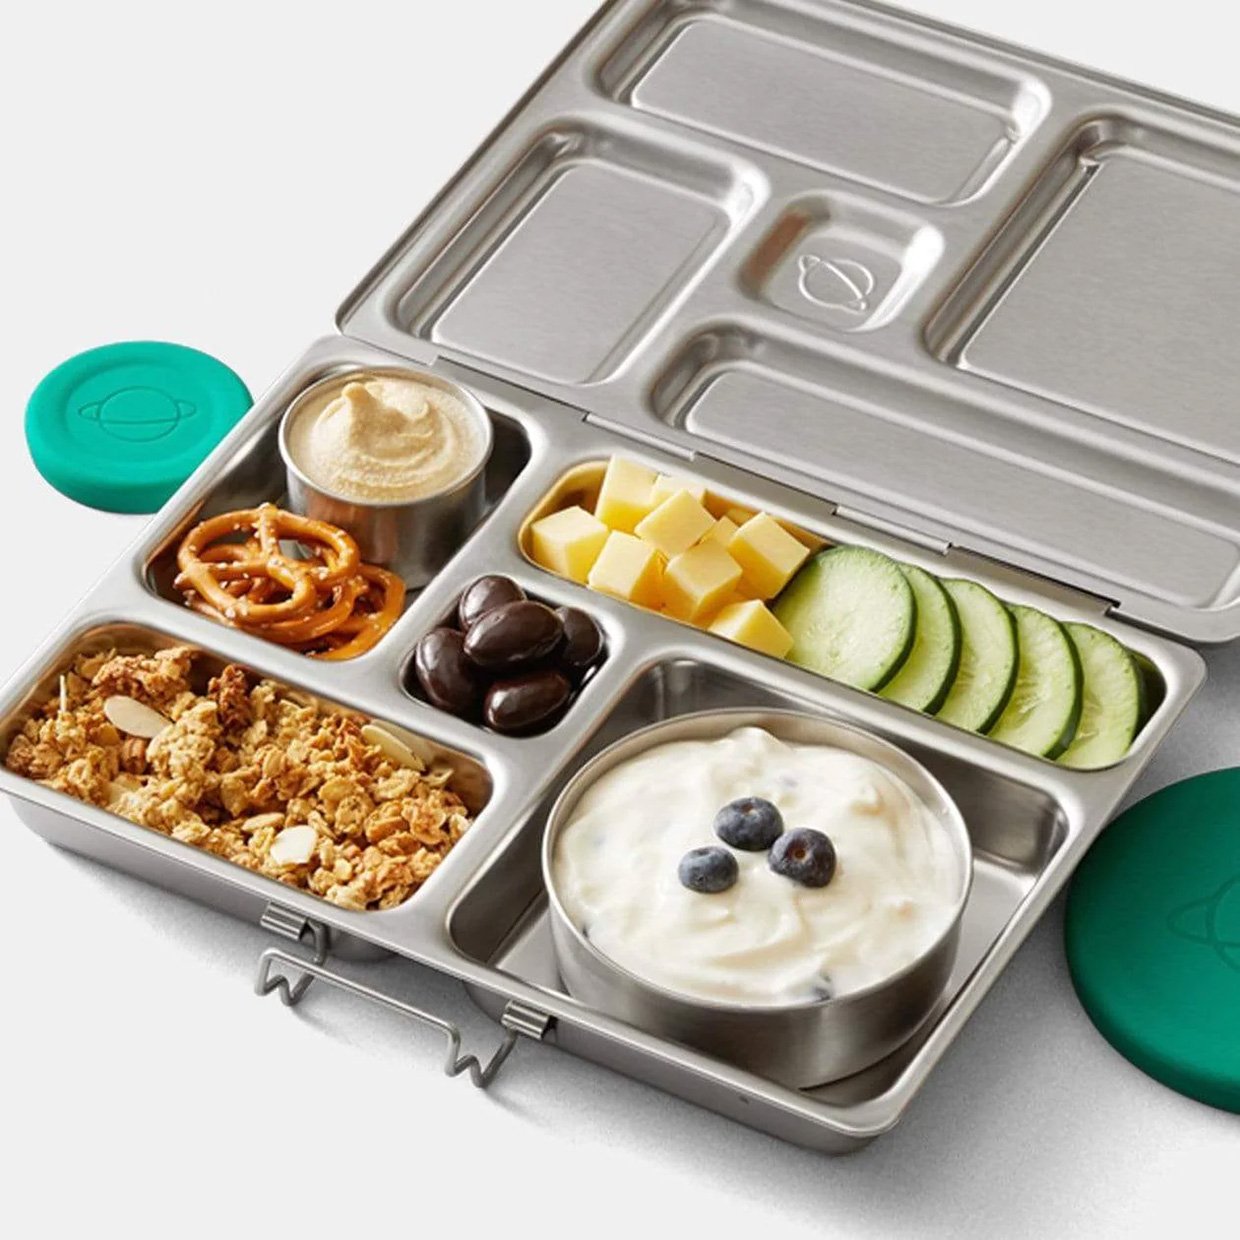 PlanetBox Rover Stainless Steel Lunchbox